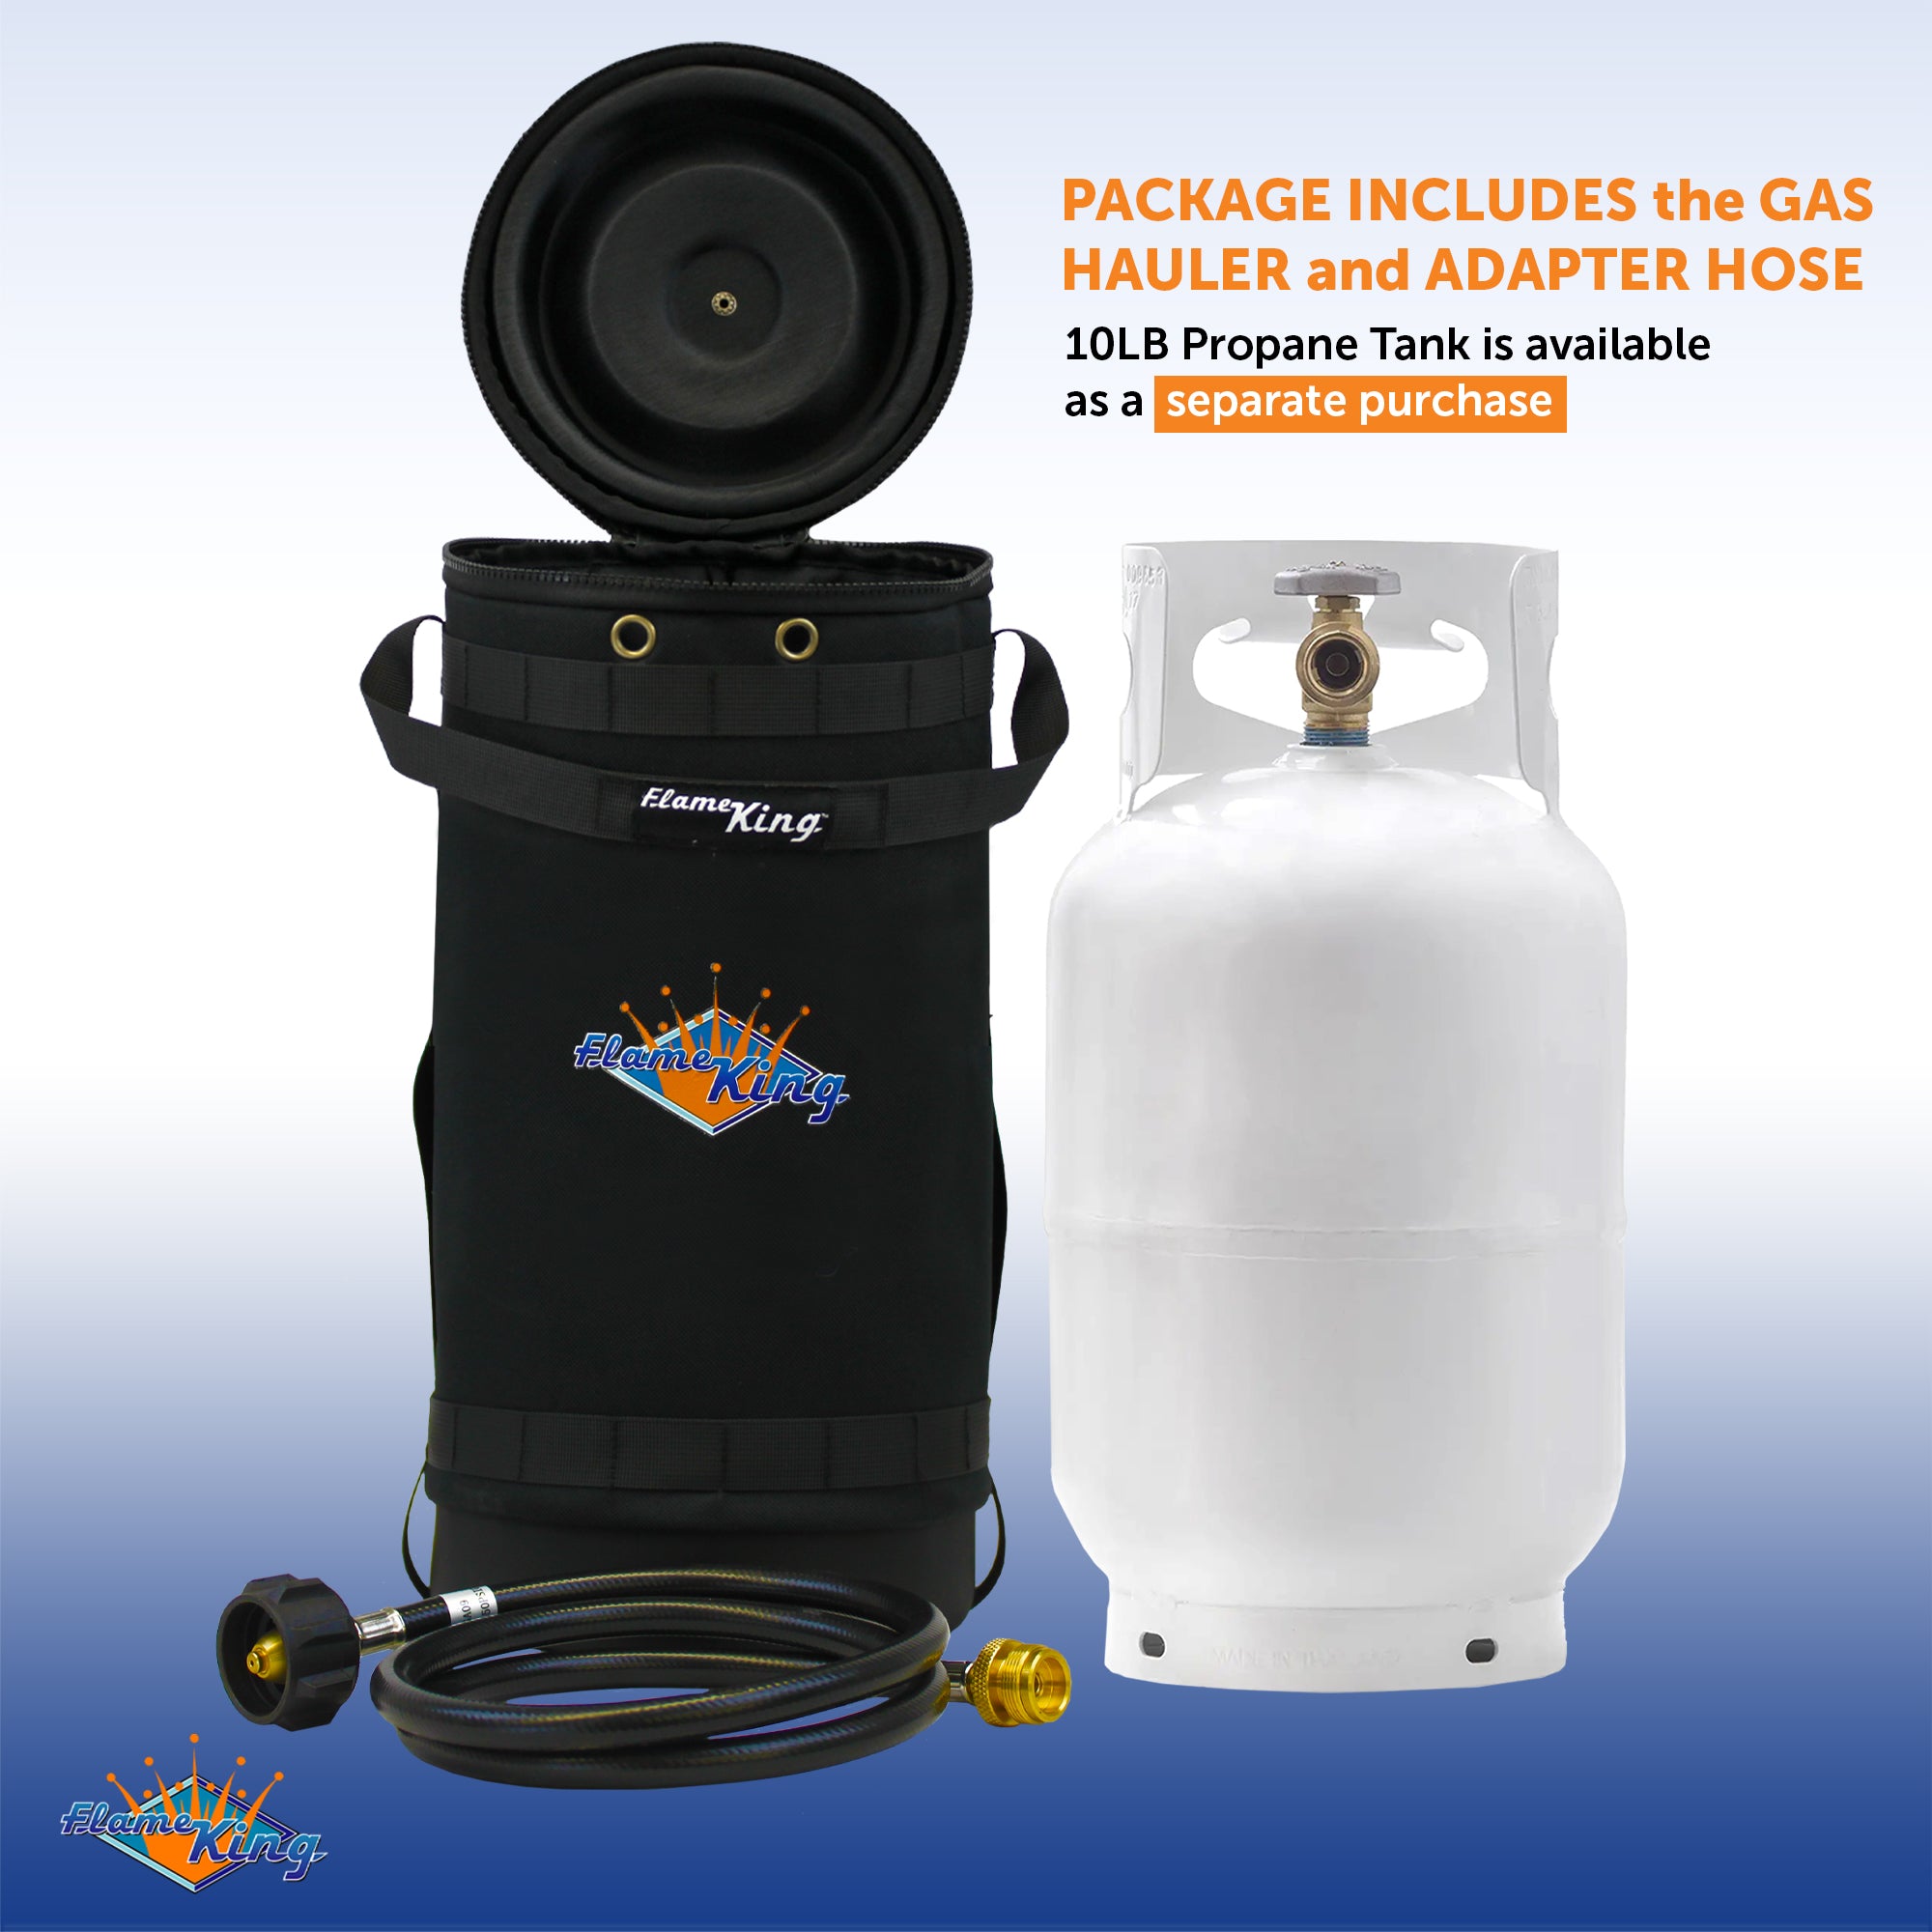 Flame King Propane Gas Hauler Kit-Insulated Protective Carry Case for 10lb Propane Tank plus Adapter Hose